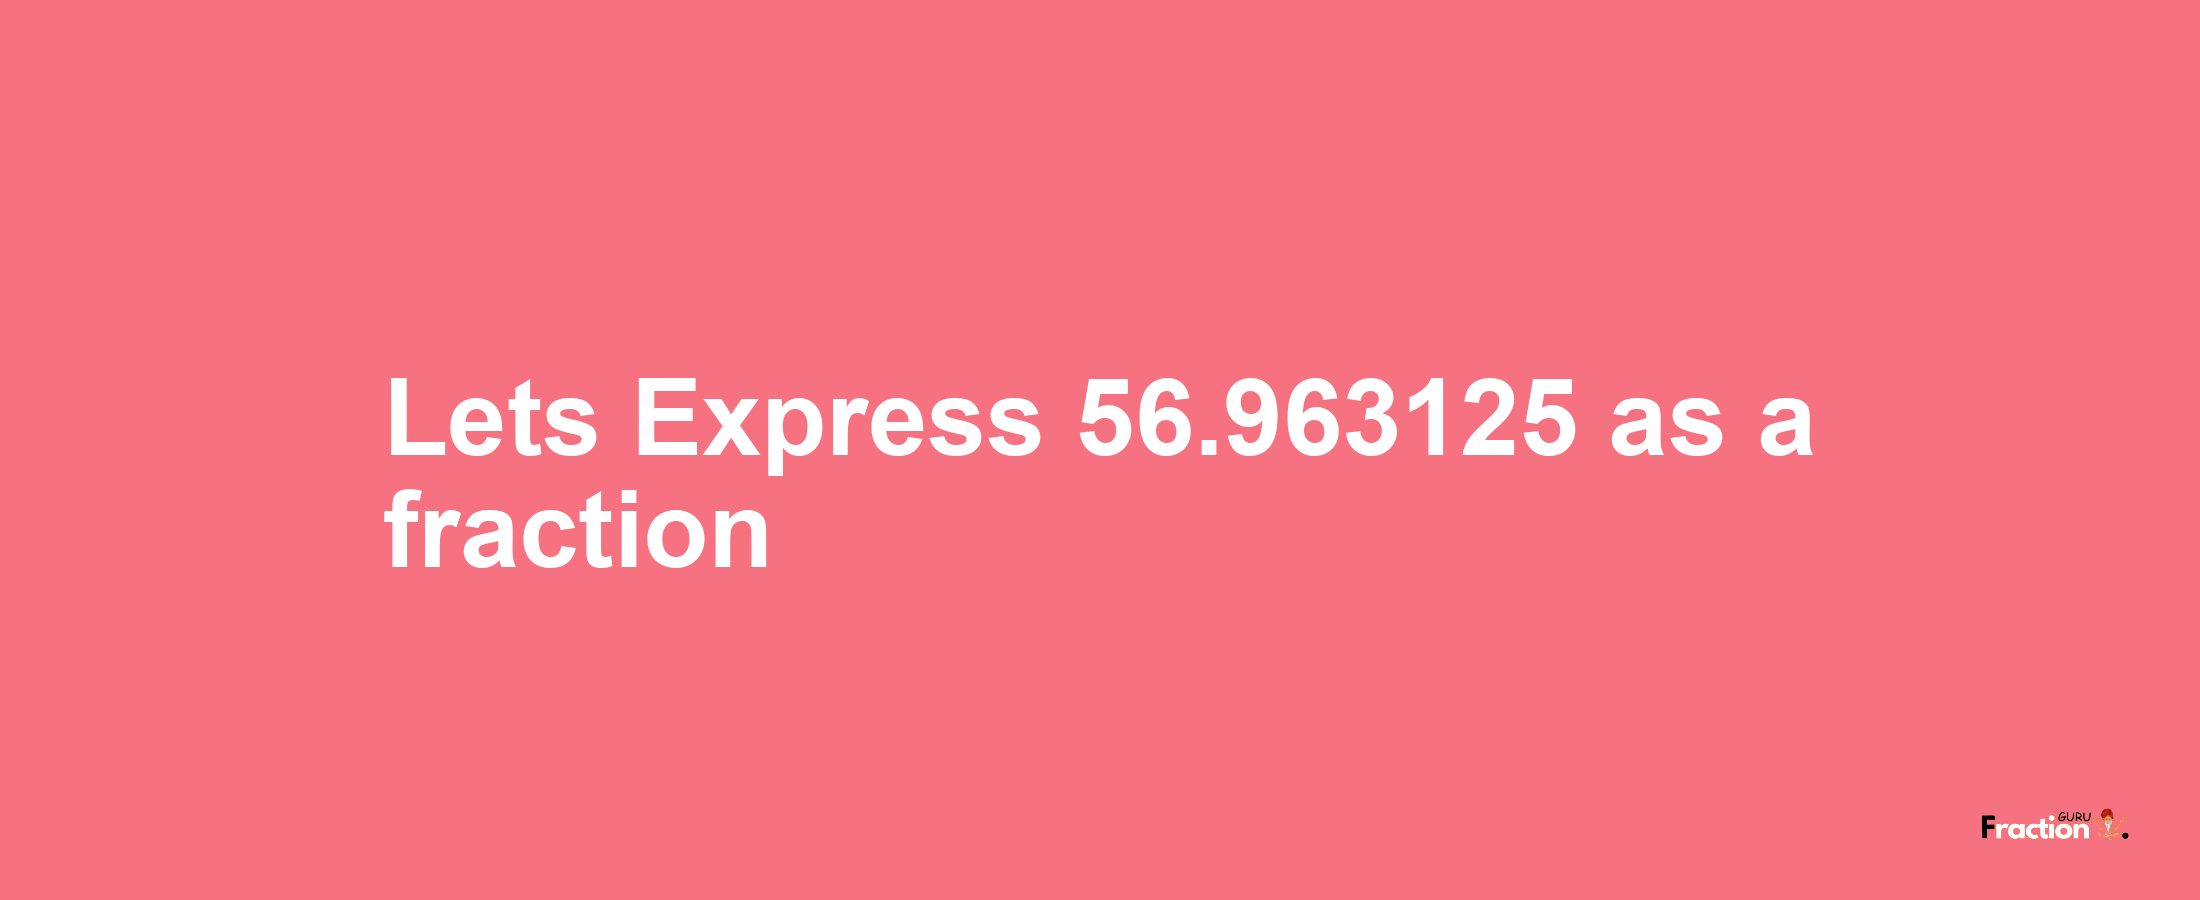 Lets Express 56.963125 as afraction